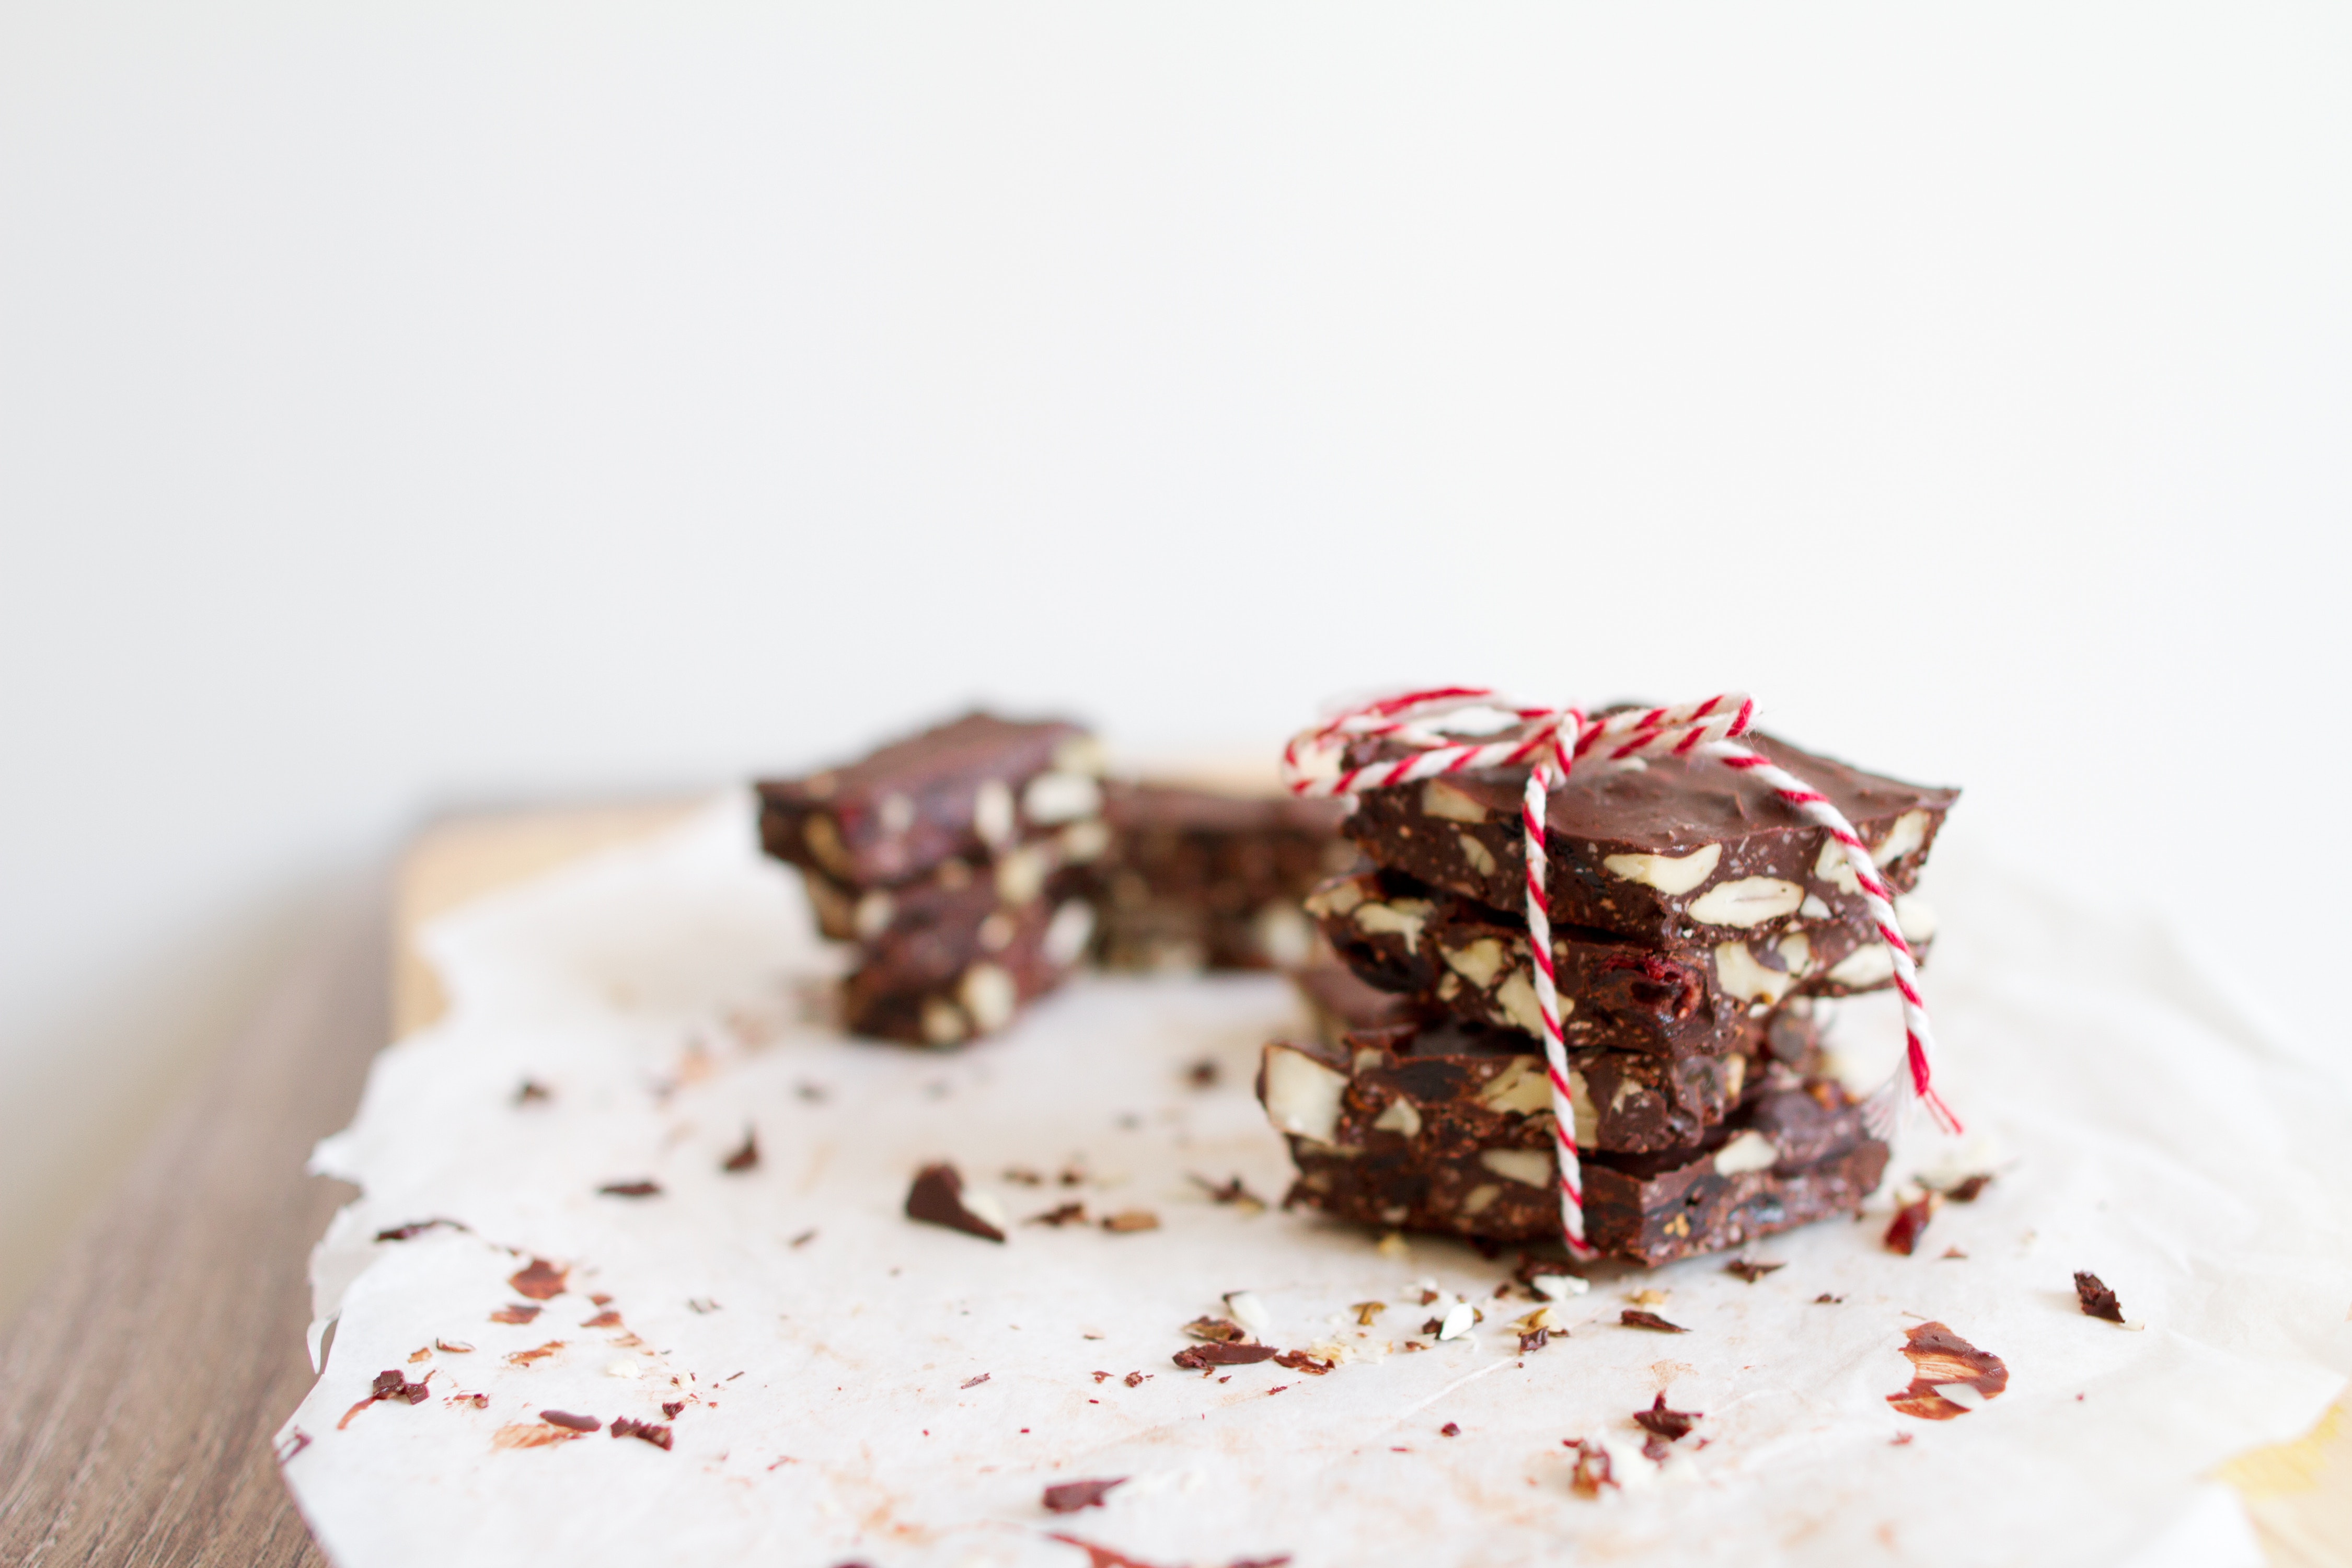 thick chocolate bark with nuts inside the chocolate